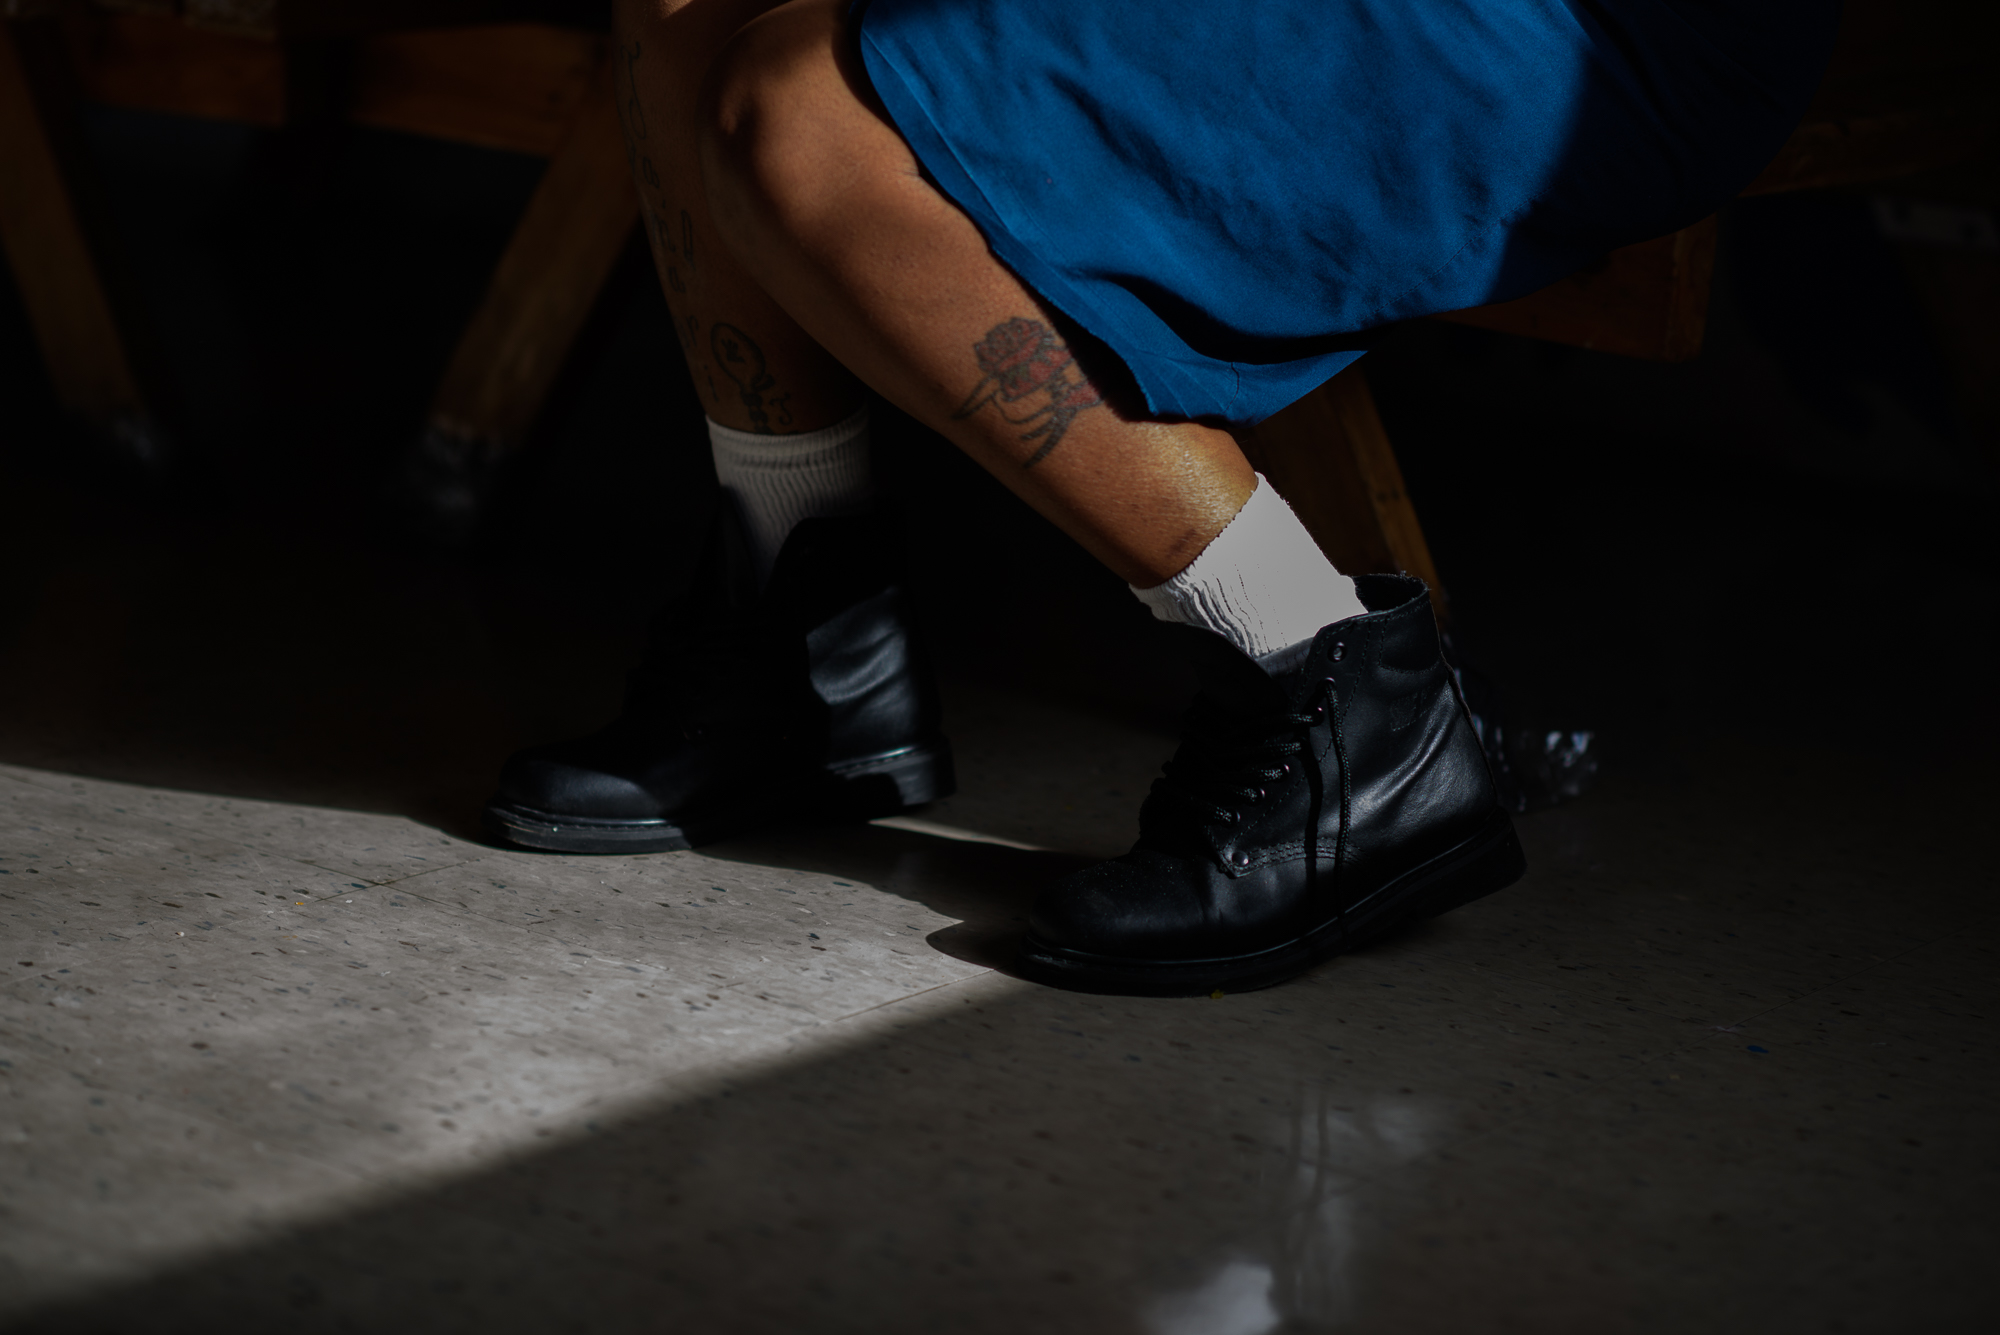  A woman’s leg as she sits during a mother-child visit at Homestead Correctional Institution in Florida City, Florida. 